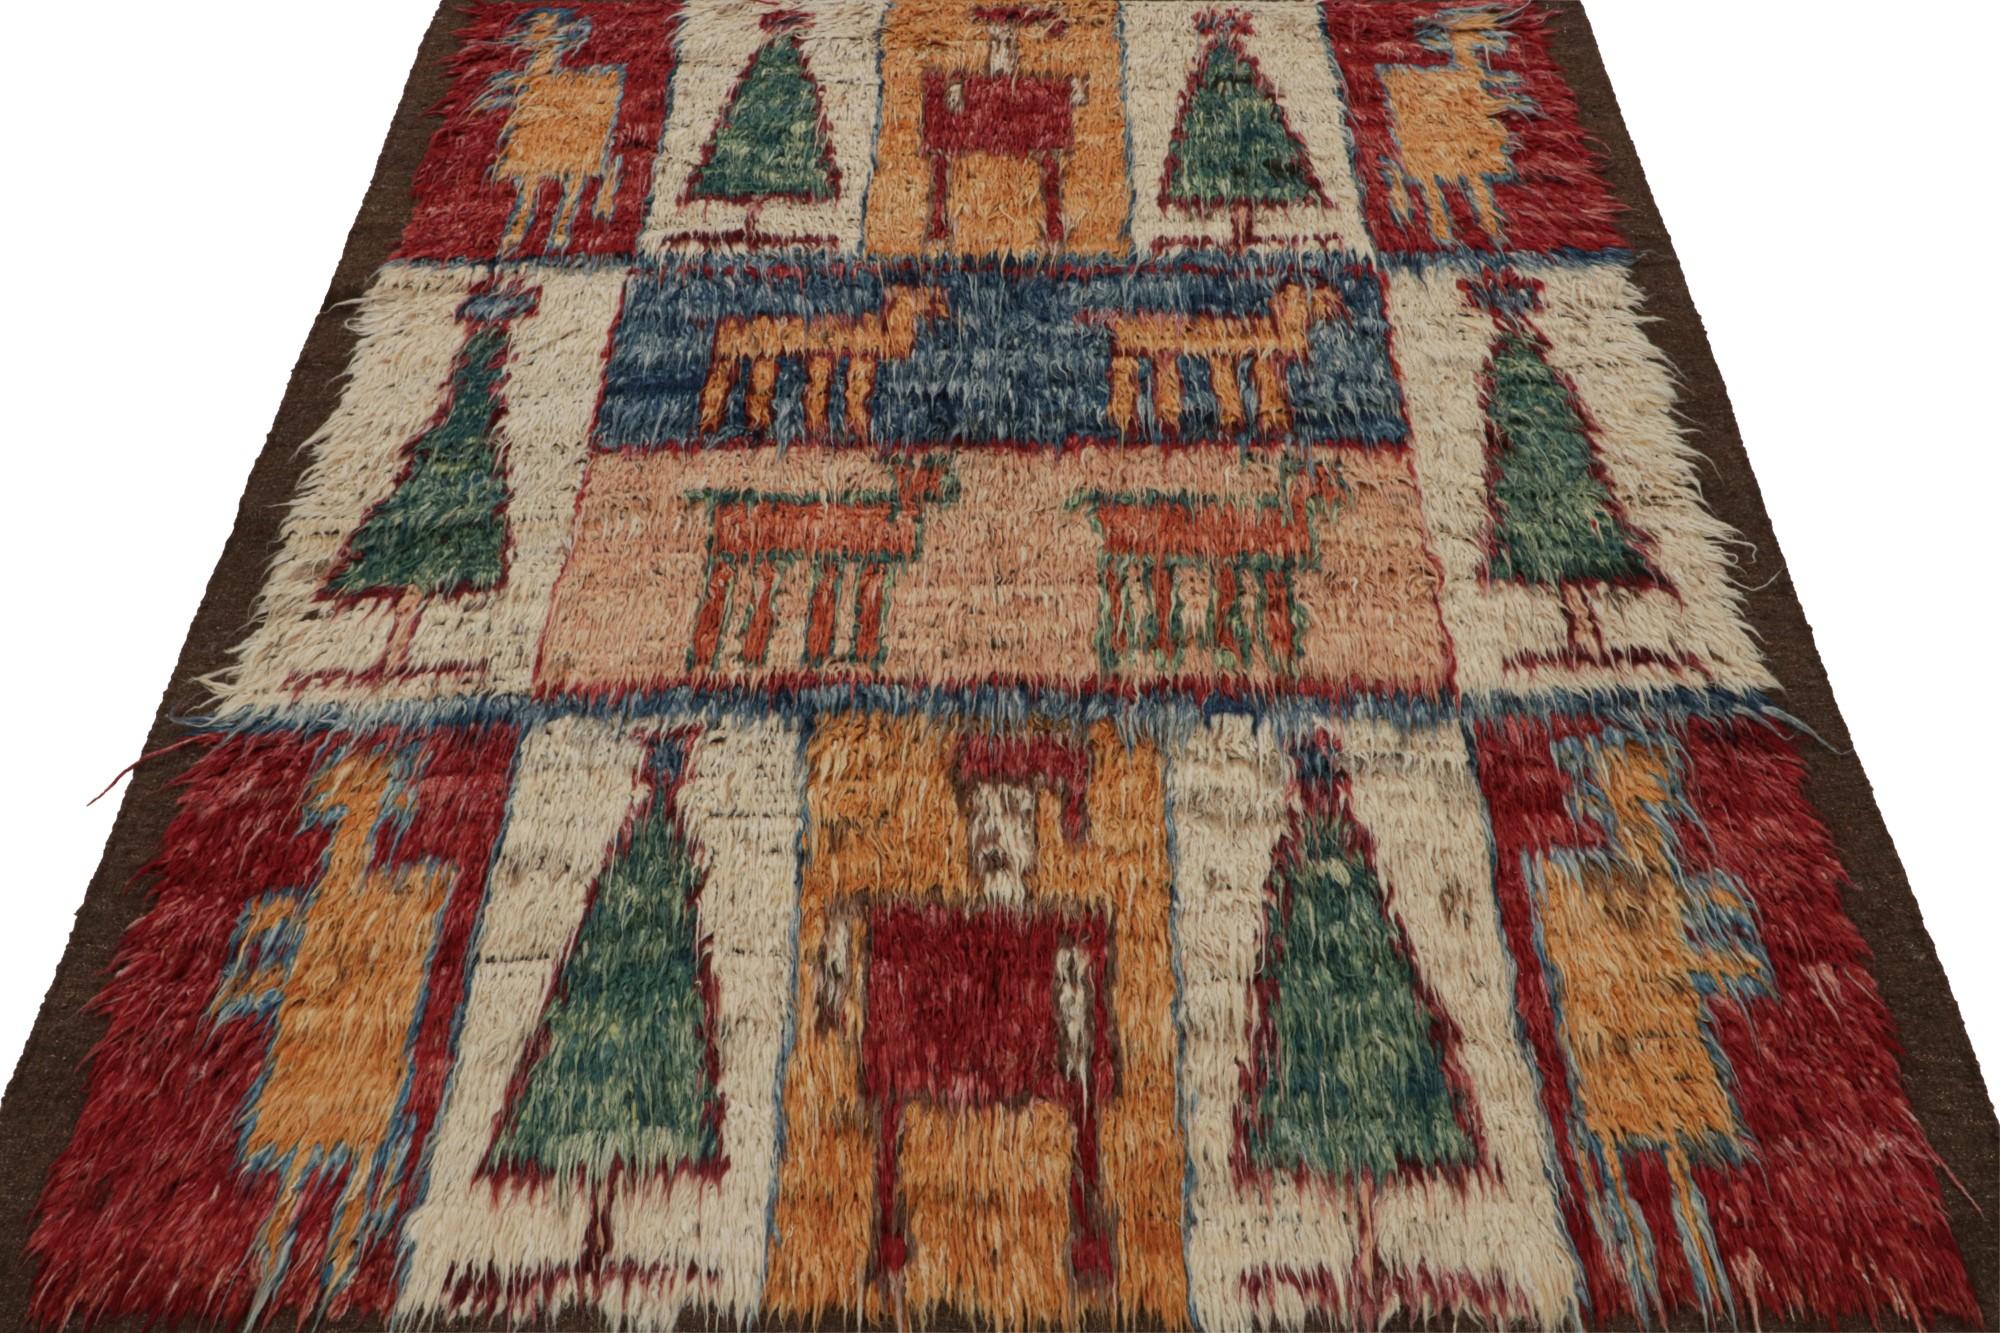 Tribal Rug & Kilim’s Moroccan Style Shag Rug with Colorful Geometric Pictorials For Sale